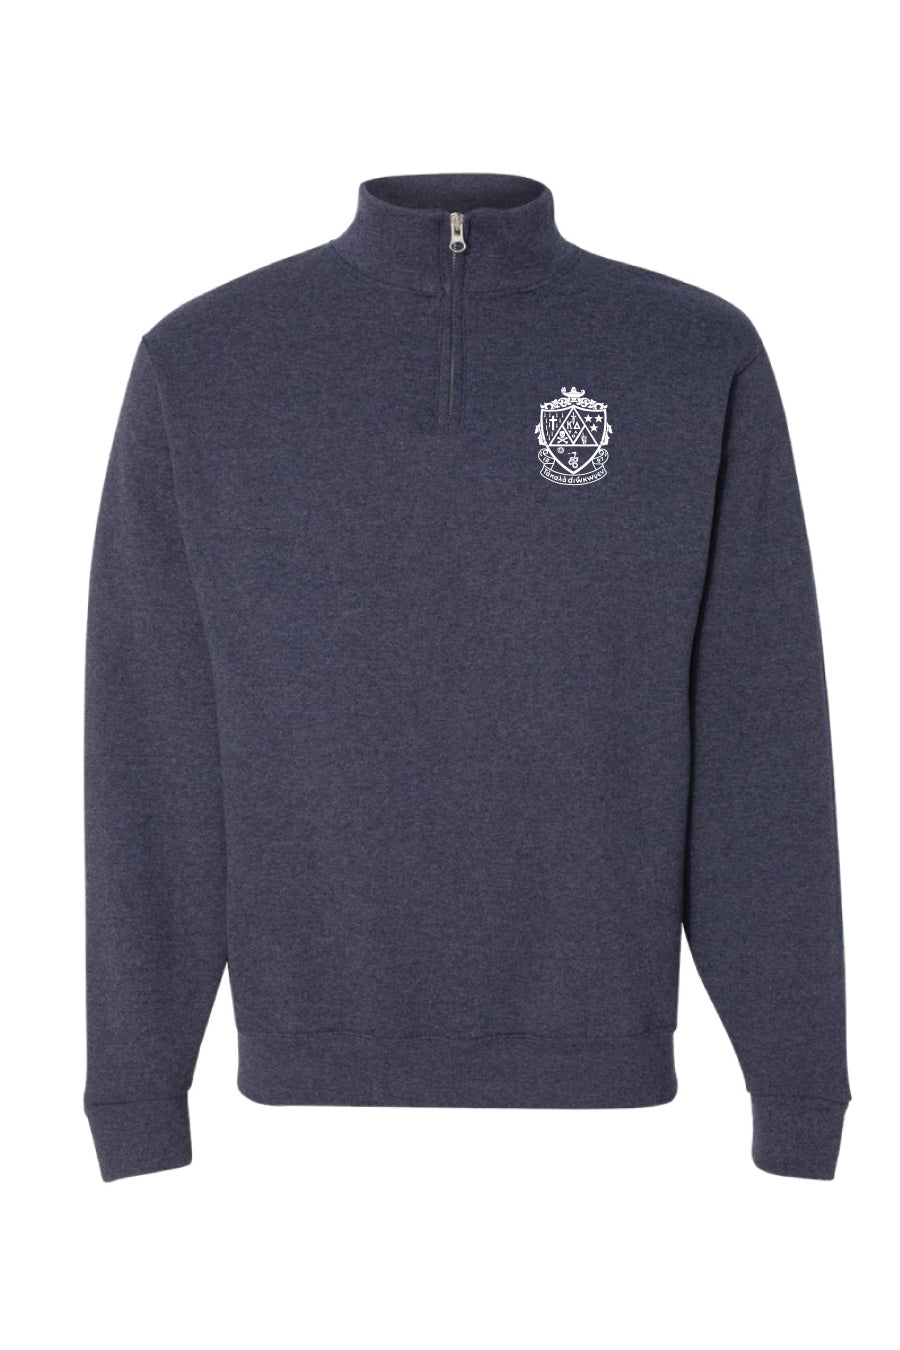 Ally Crest Pullover